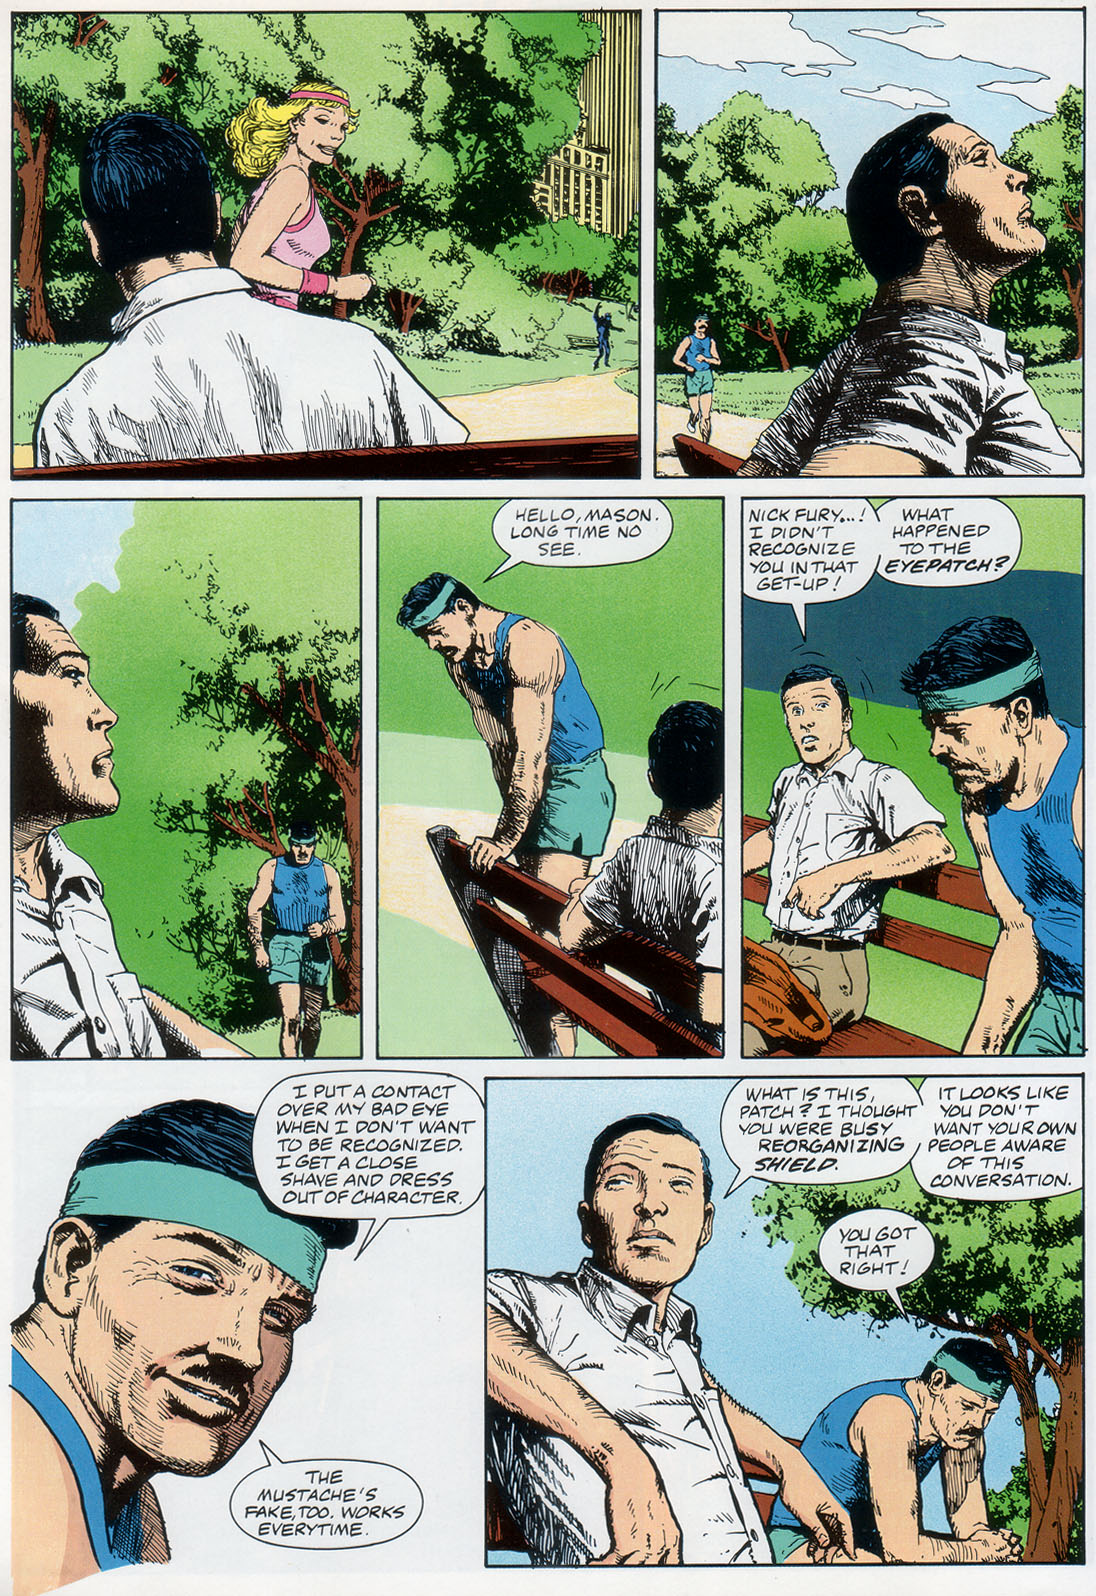 Marvel Graphic Novel issue 57 - Rick Mason - The Agent - Page 24